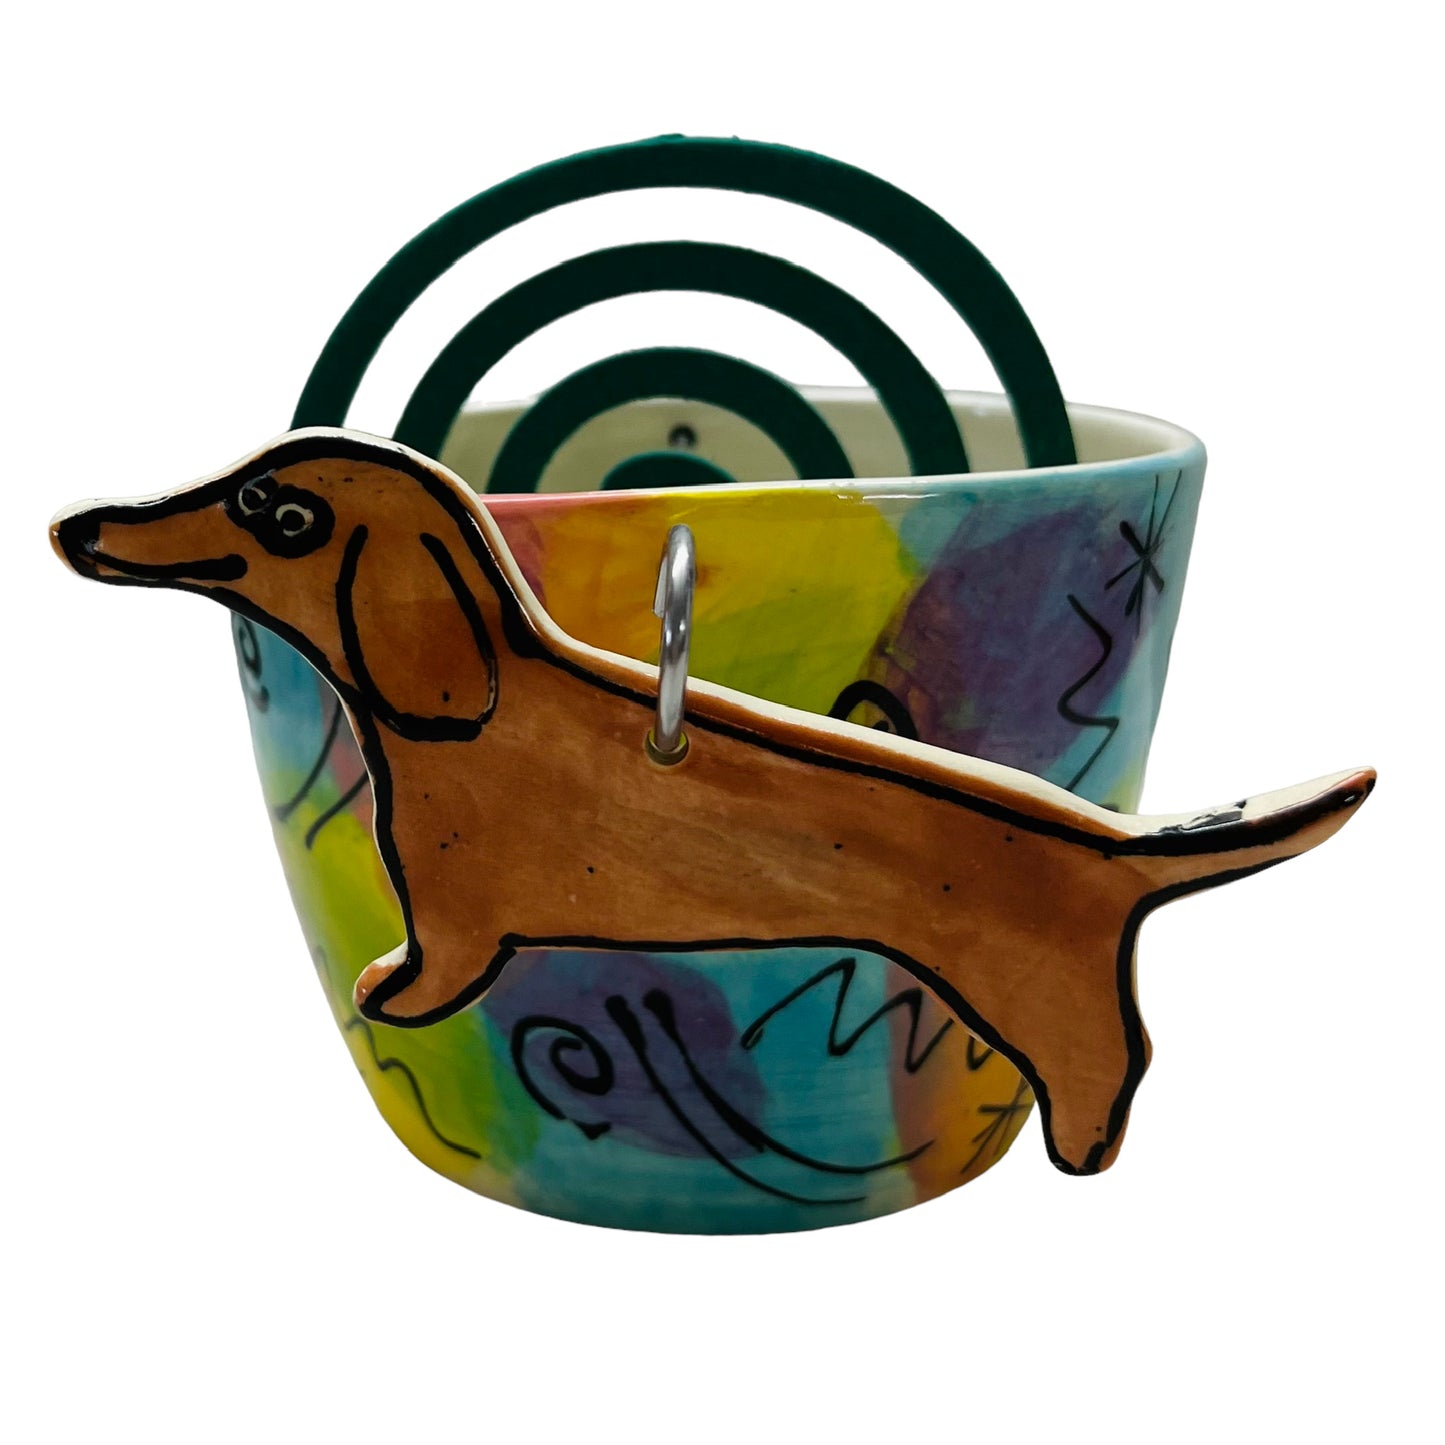 Dachshund Mosquito Coil holder (oval shape).